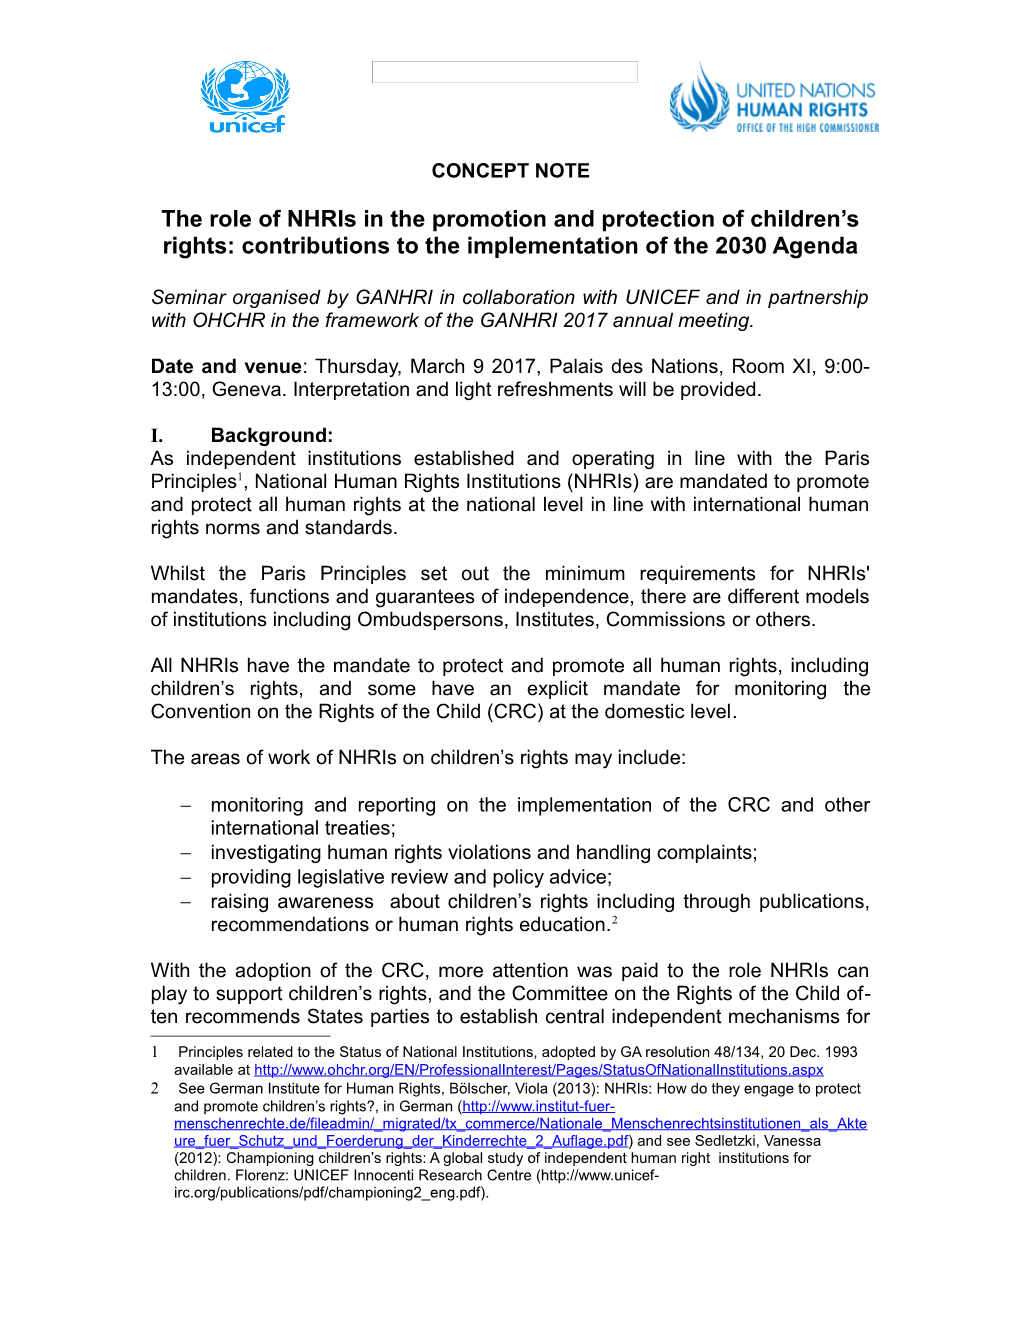 The Role of Nhris in the Promotion and Protection of Children S Rights: Contributions